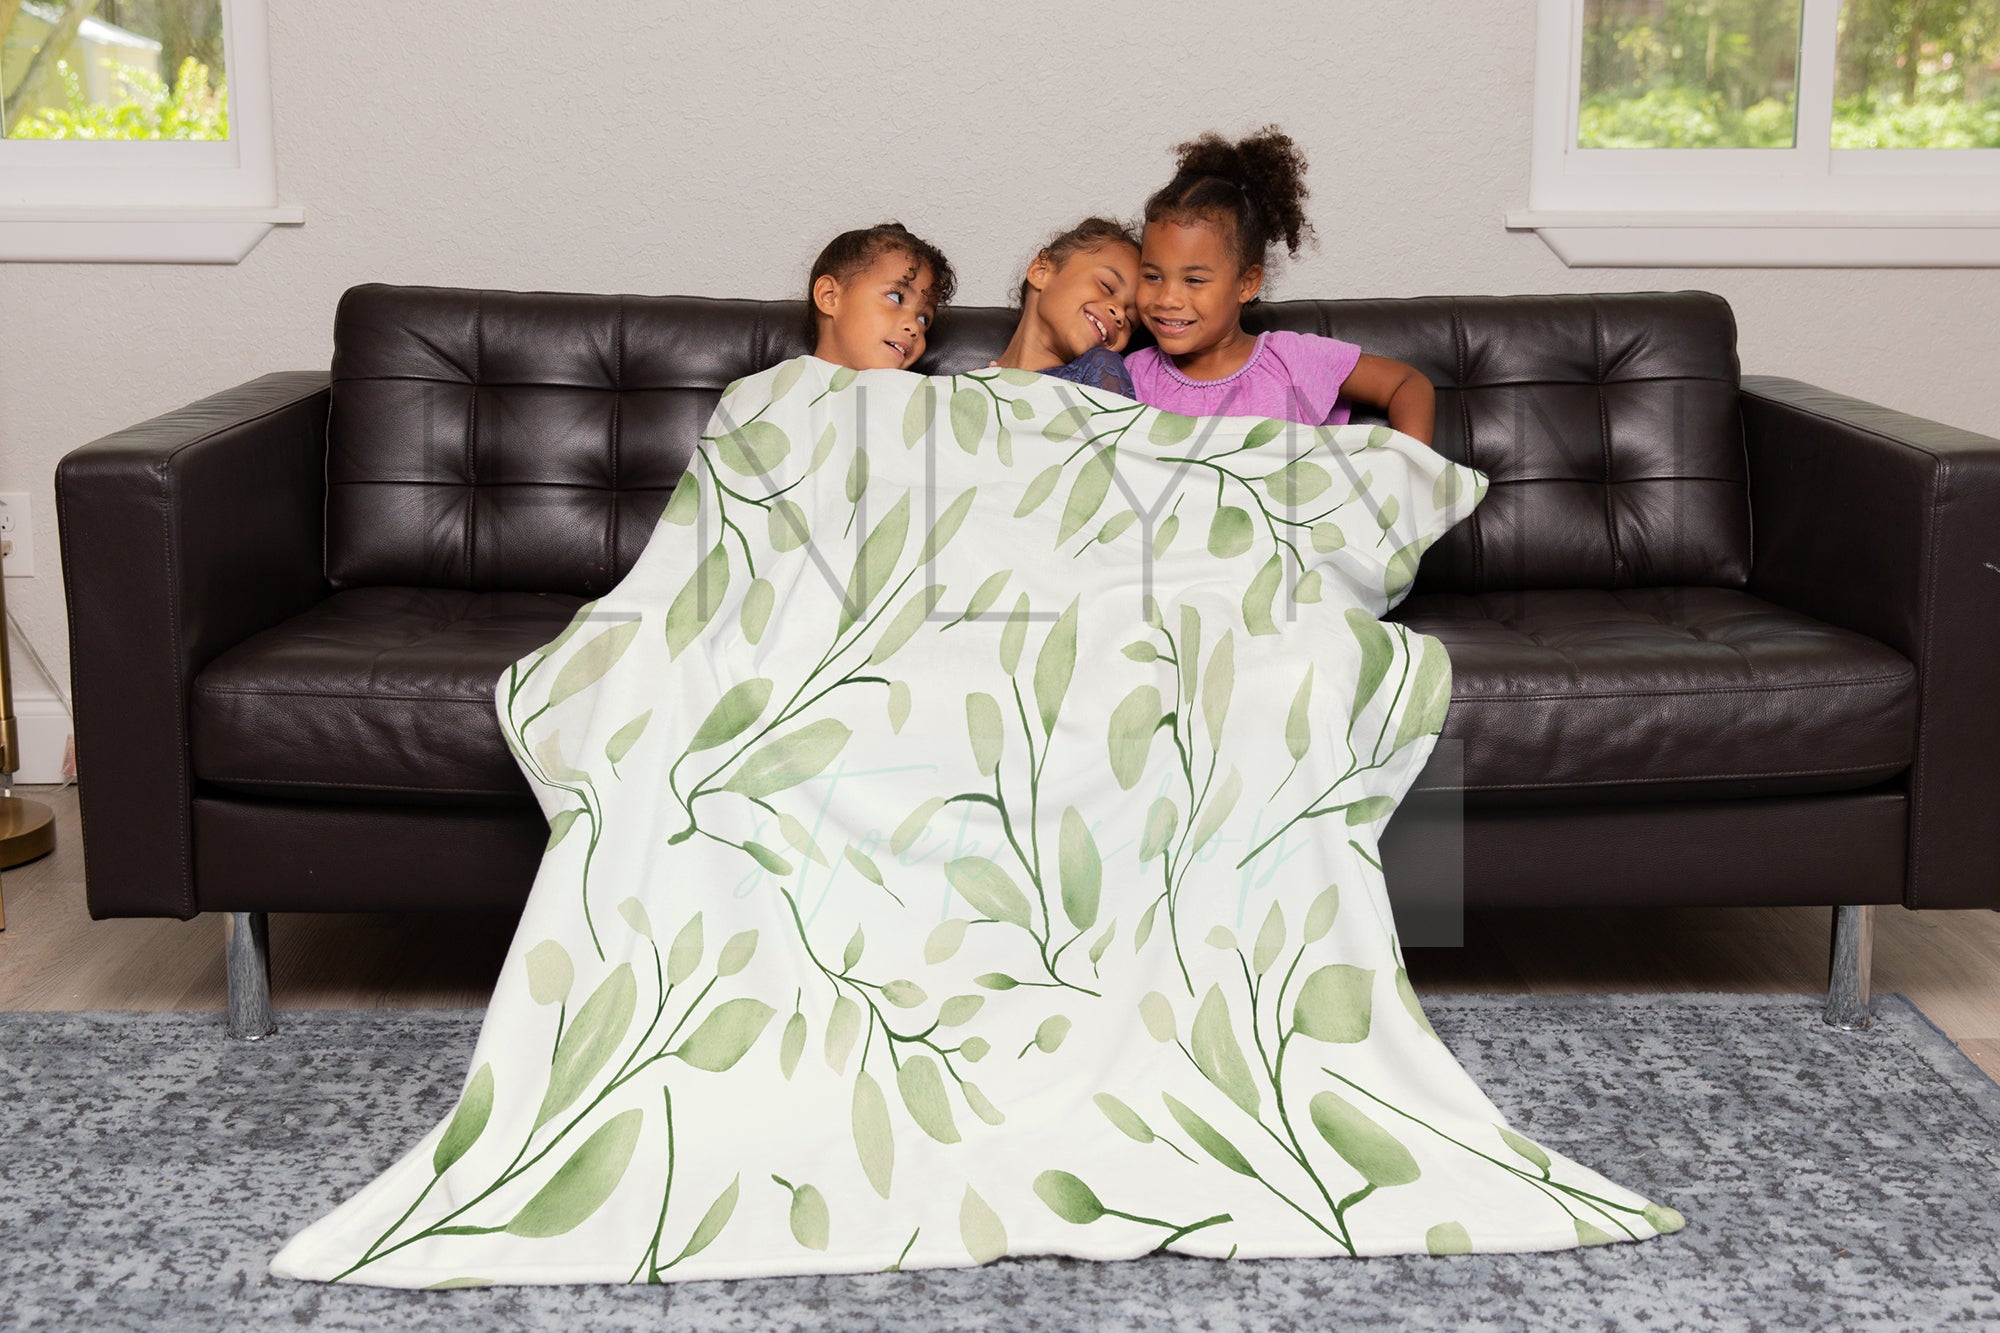 50x60 Minky Blanket + Black Models on Couch Mockup #TH05